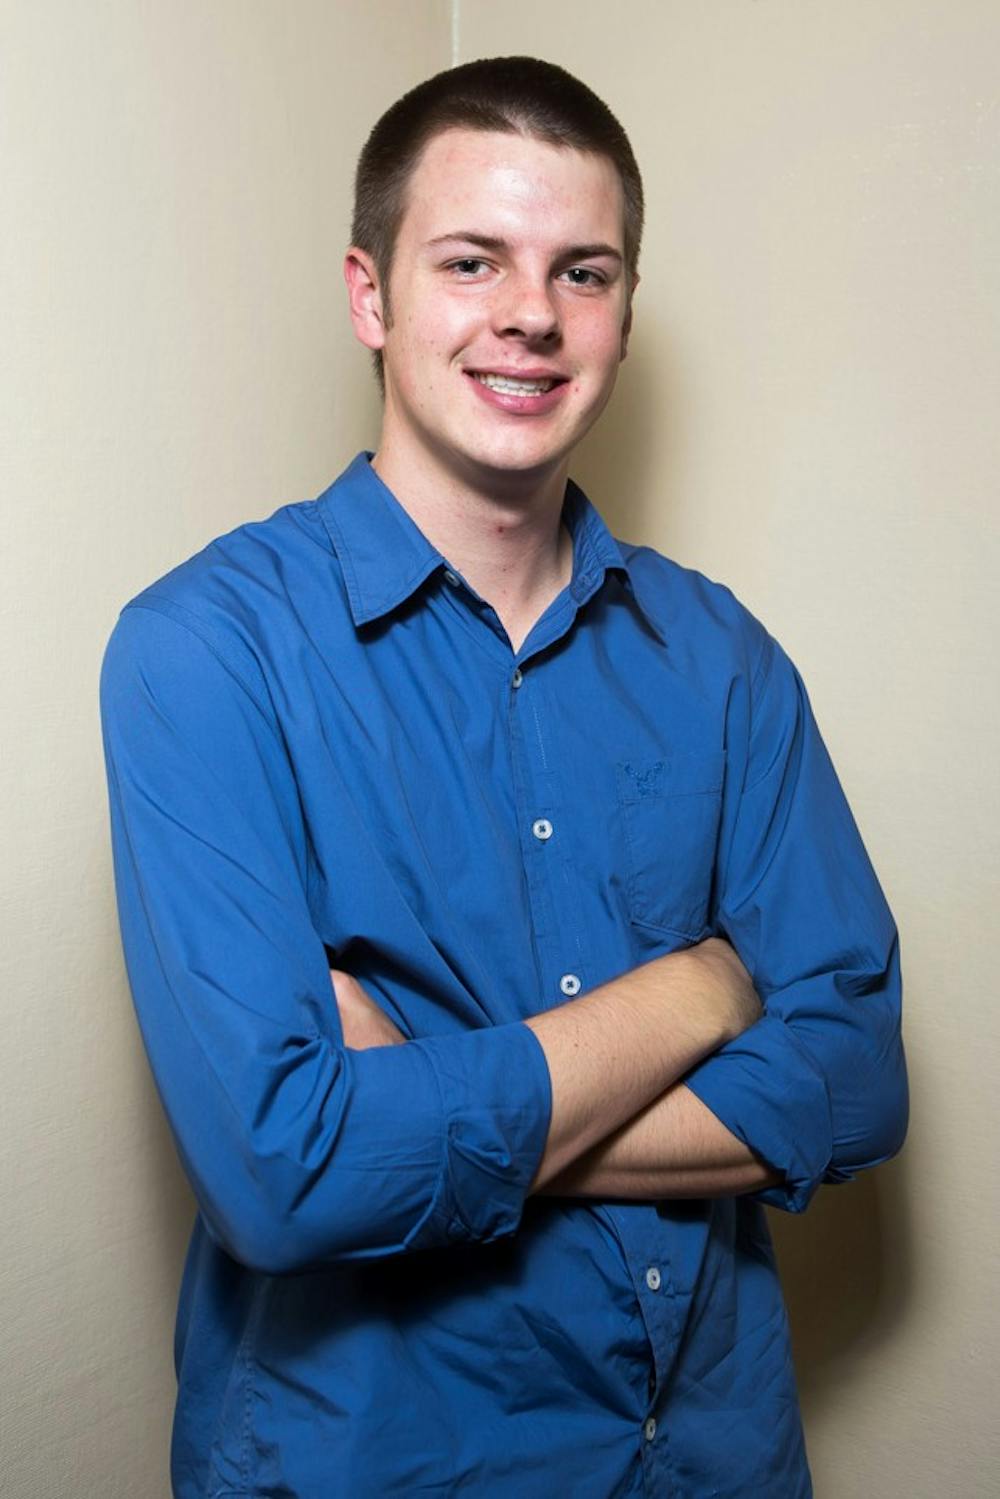 Marketing senior Jack Wight has his own online buy back business for phones and electronics. (Photo by Ryan Liu)